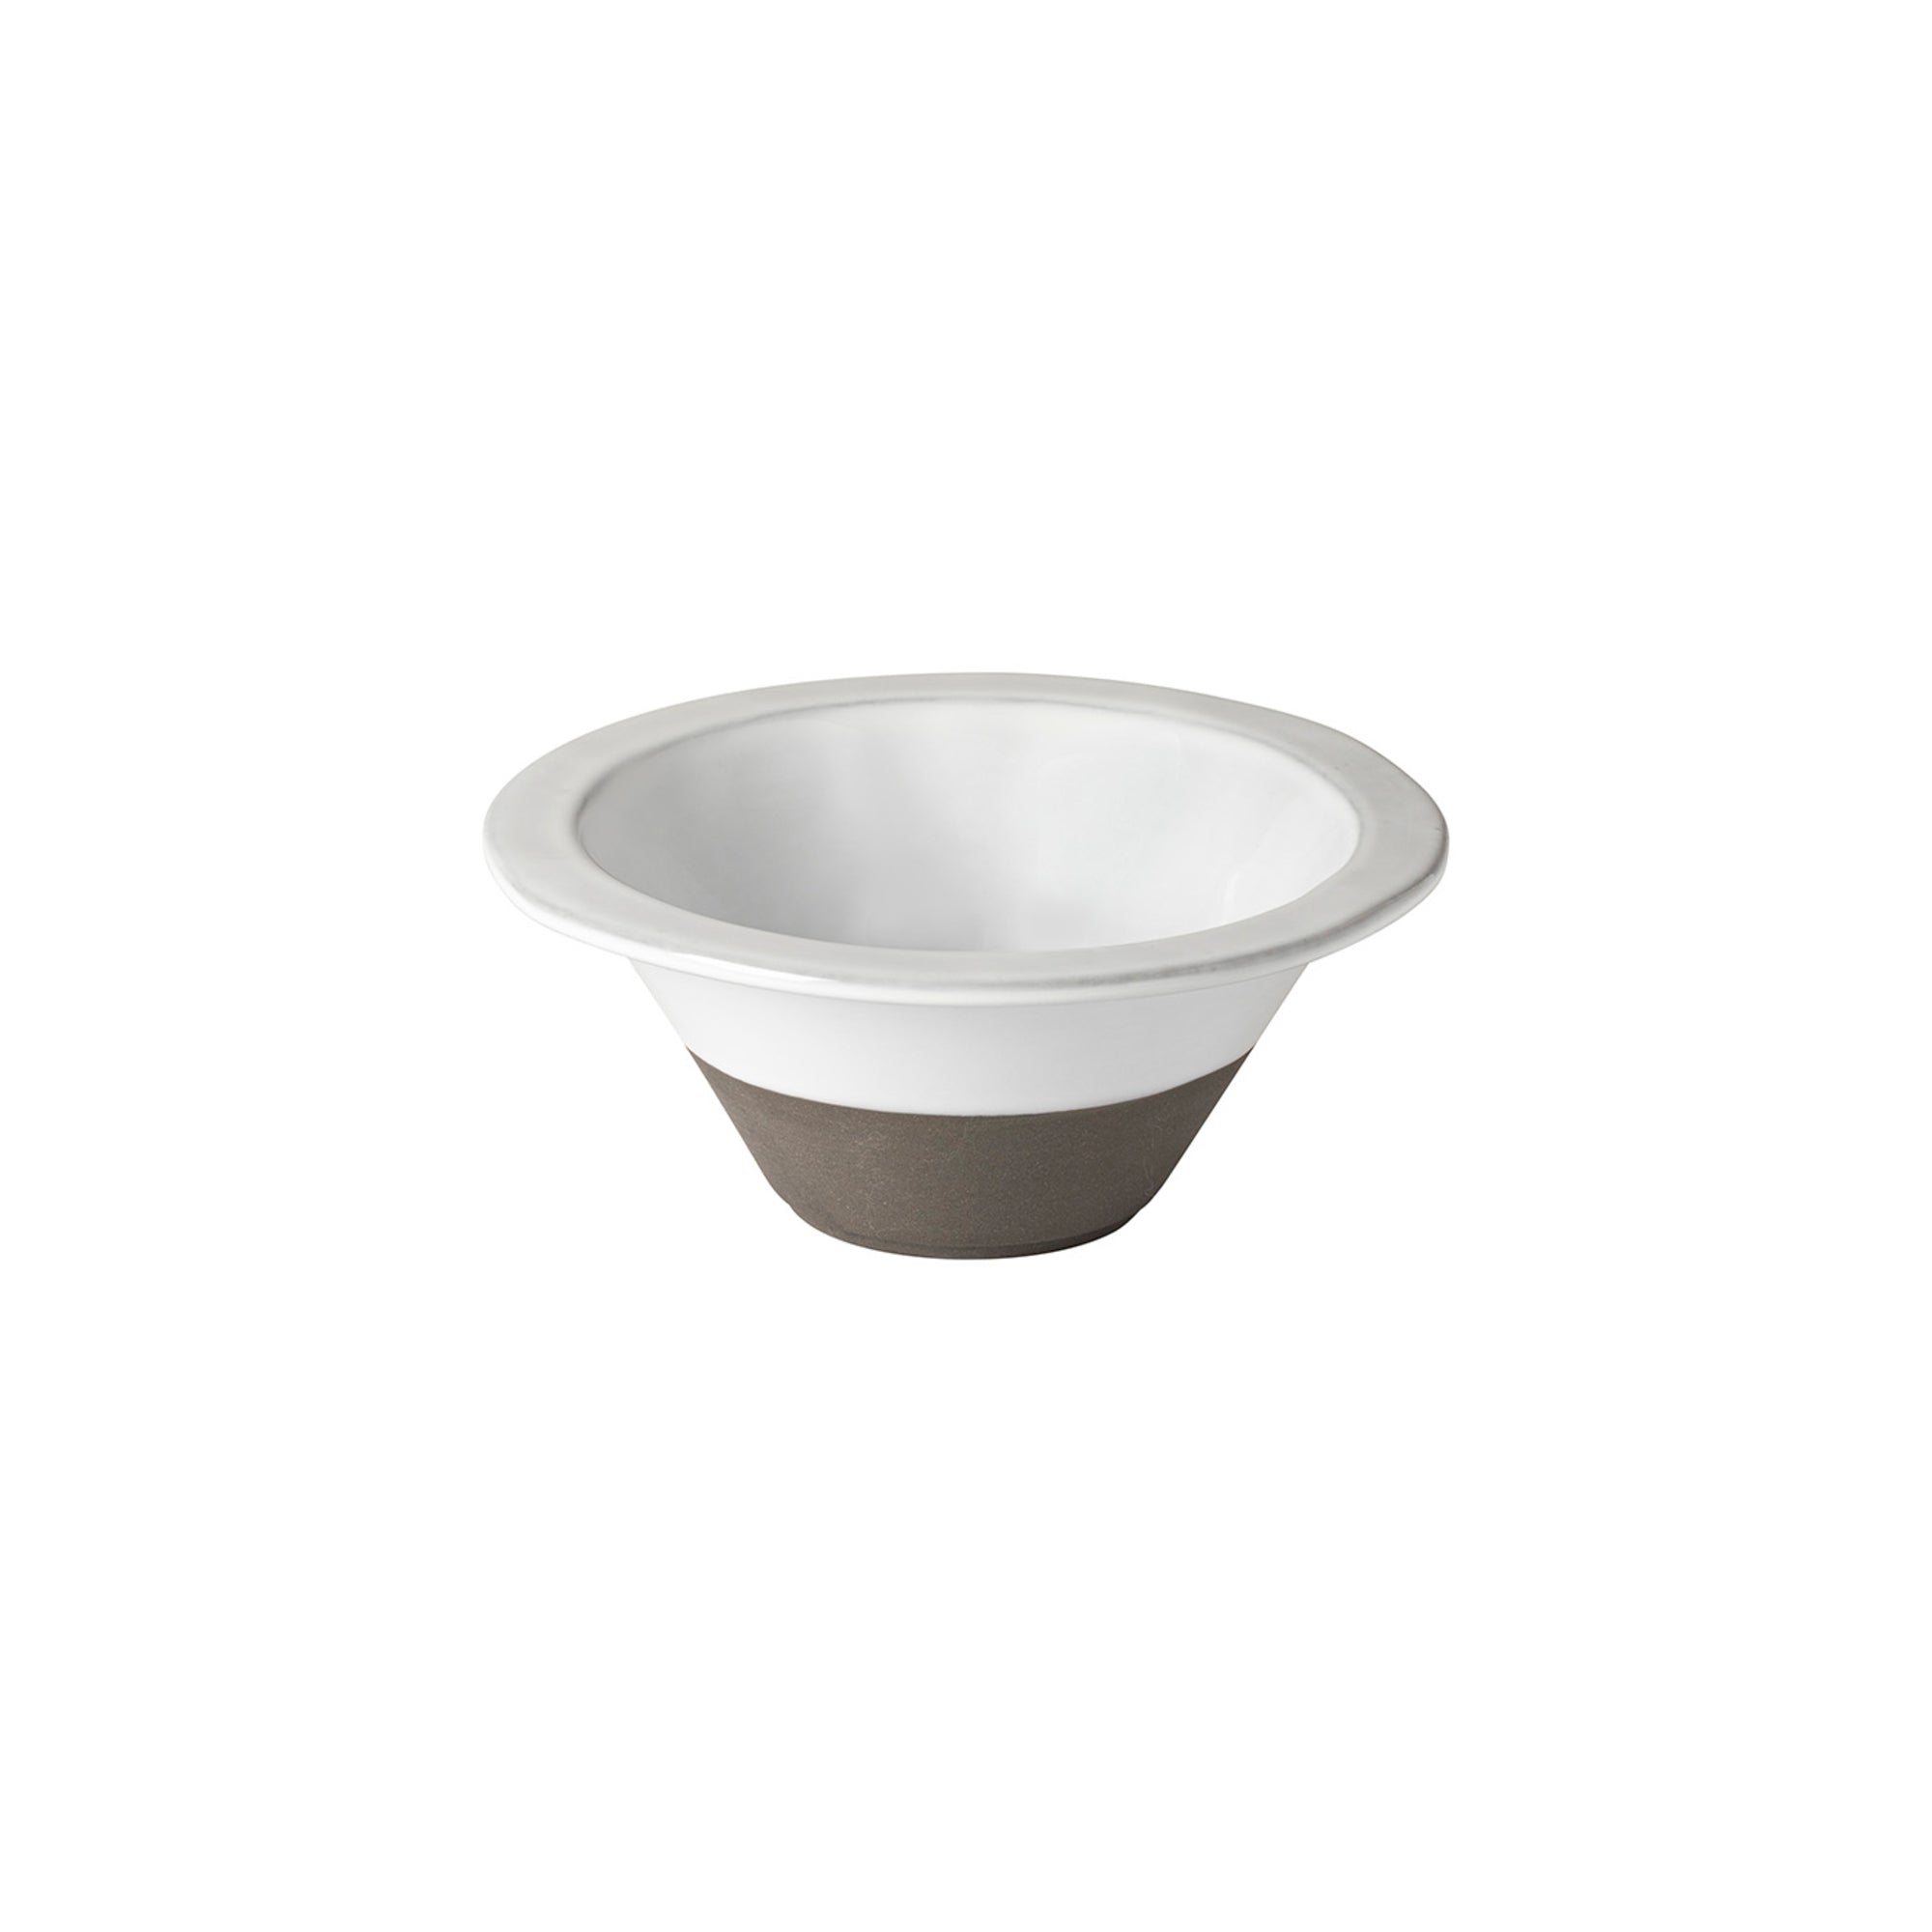 Plano Soup/Cereal Bowl 7"